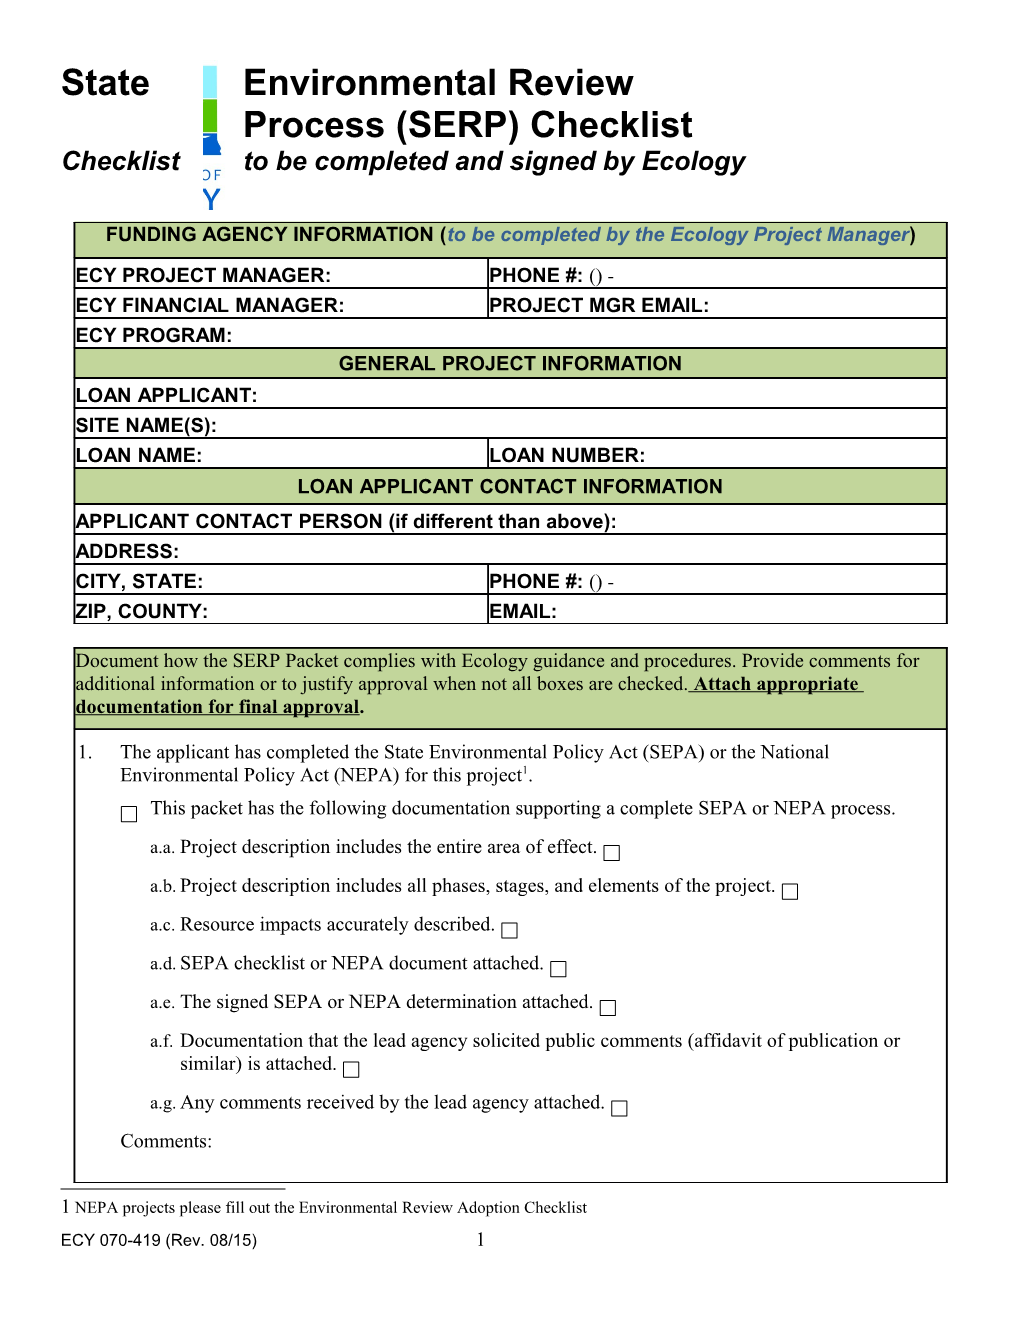 State Environmental Review Process (SERP) Checklist